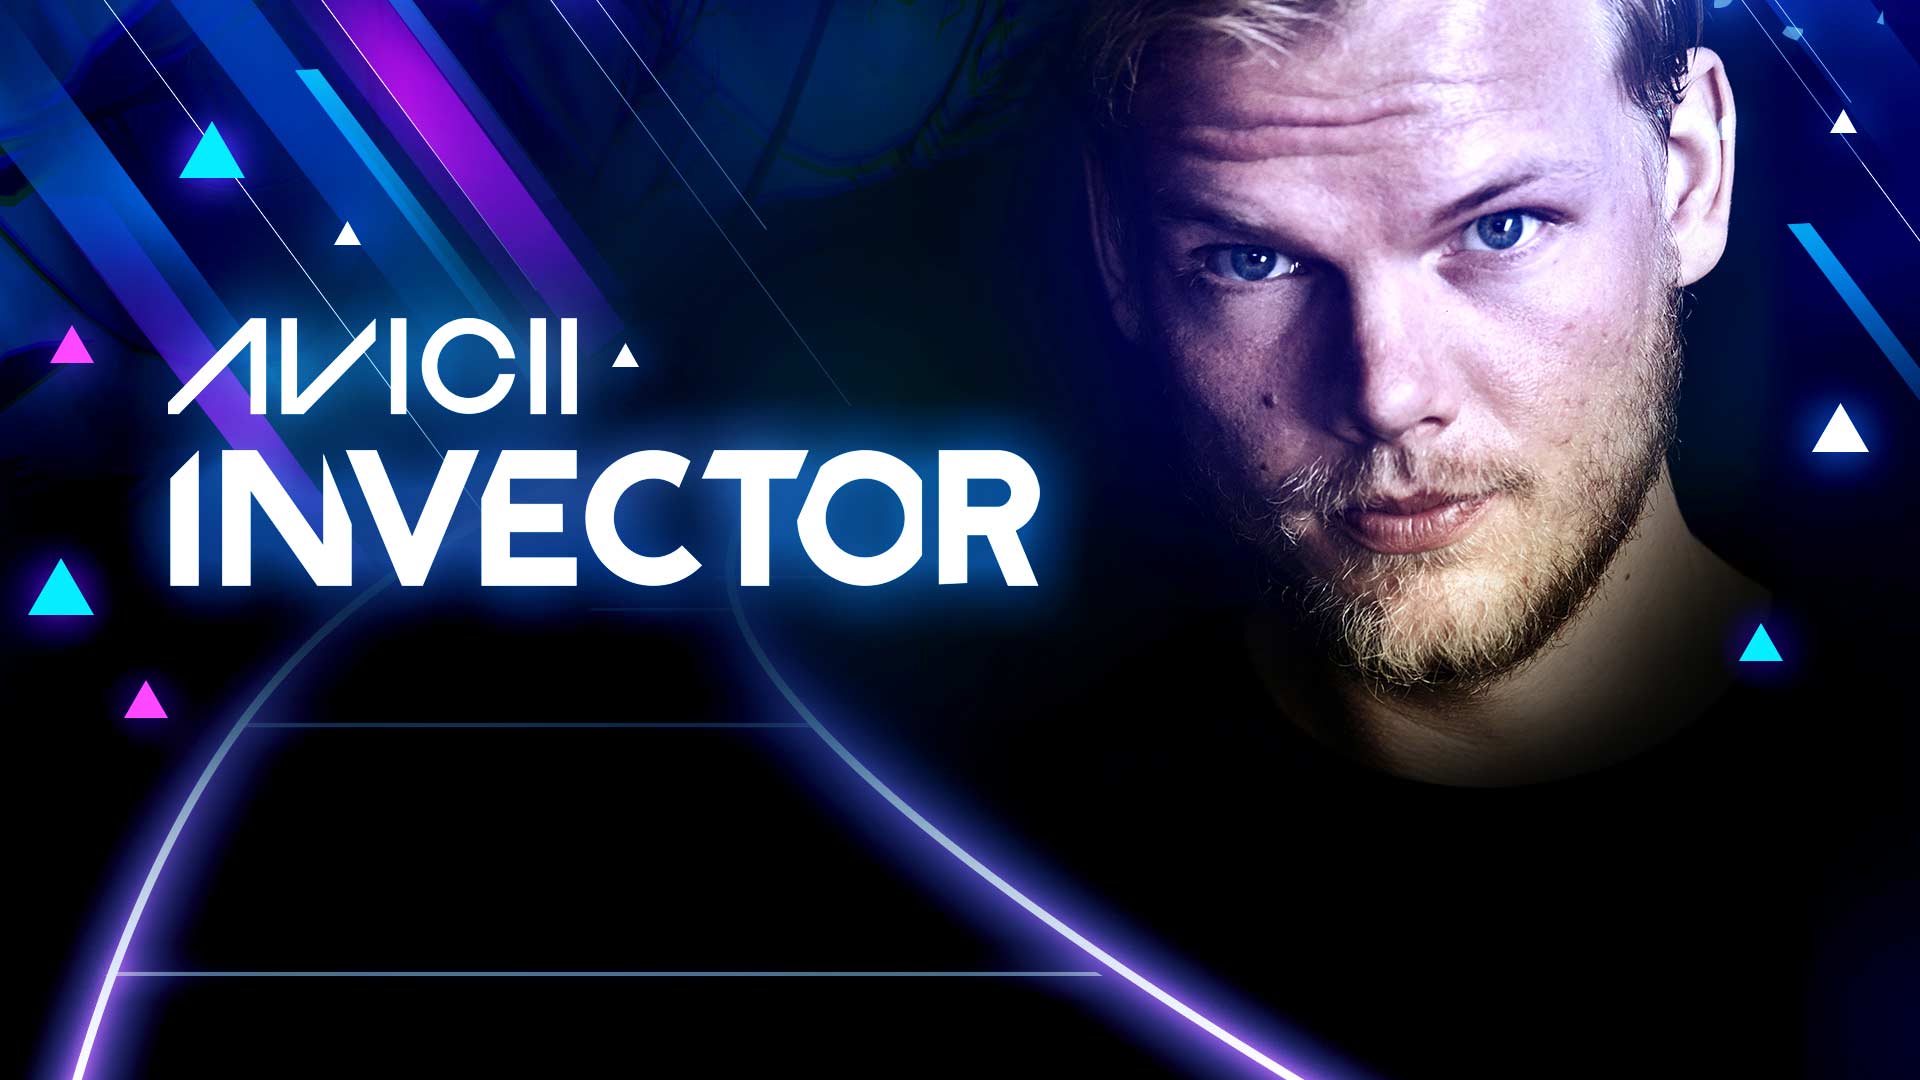 Avicii Invector Wired Productions